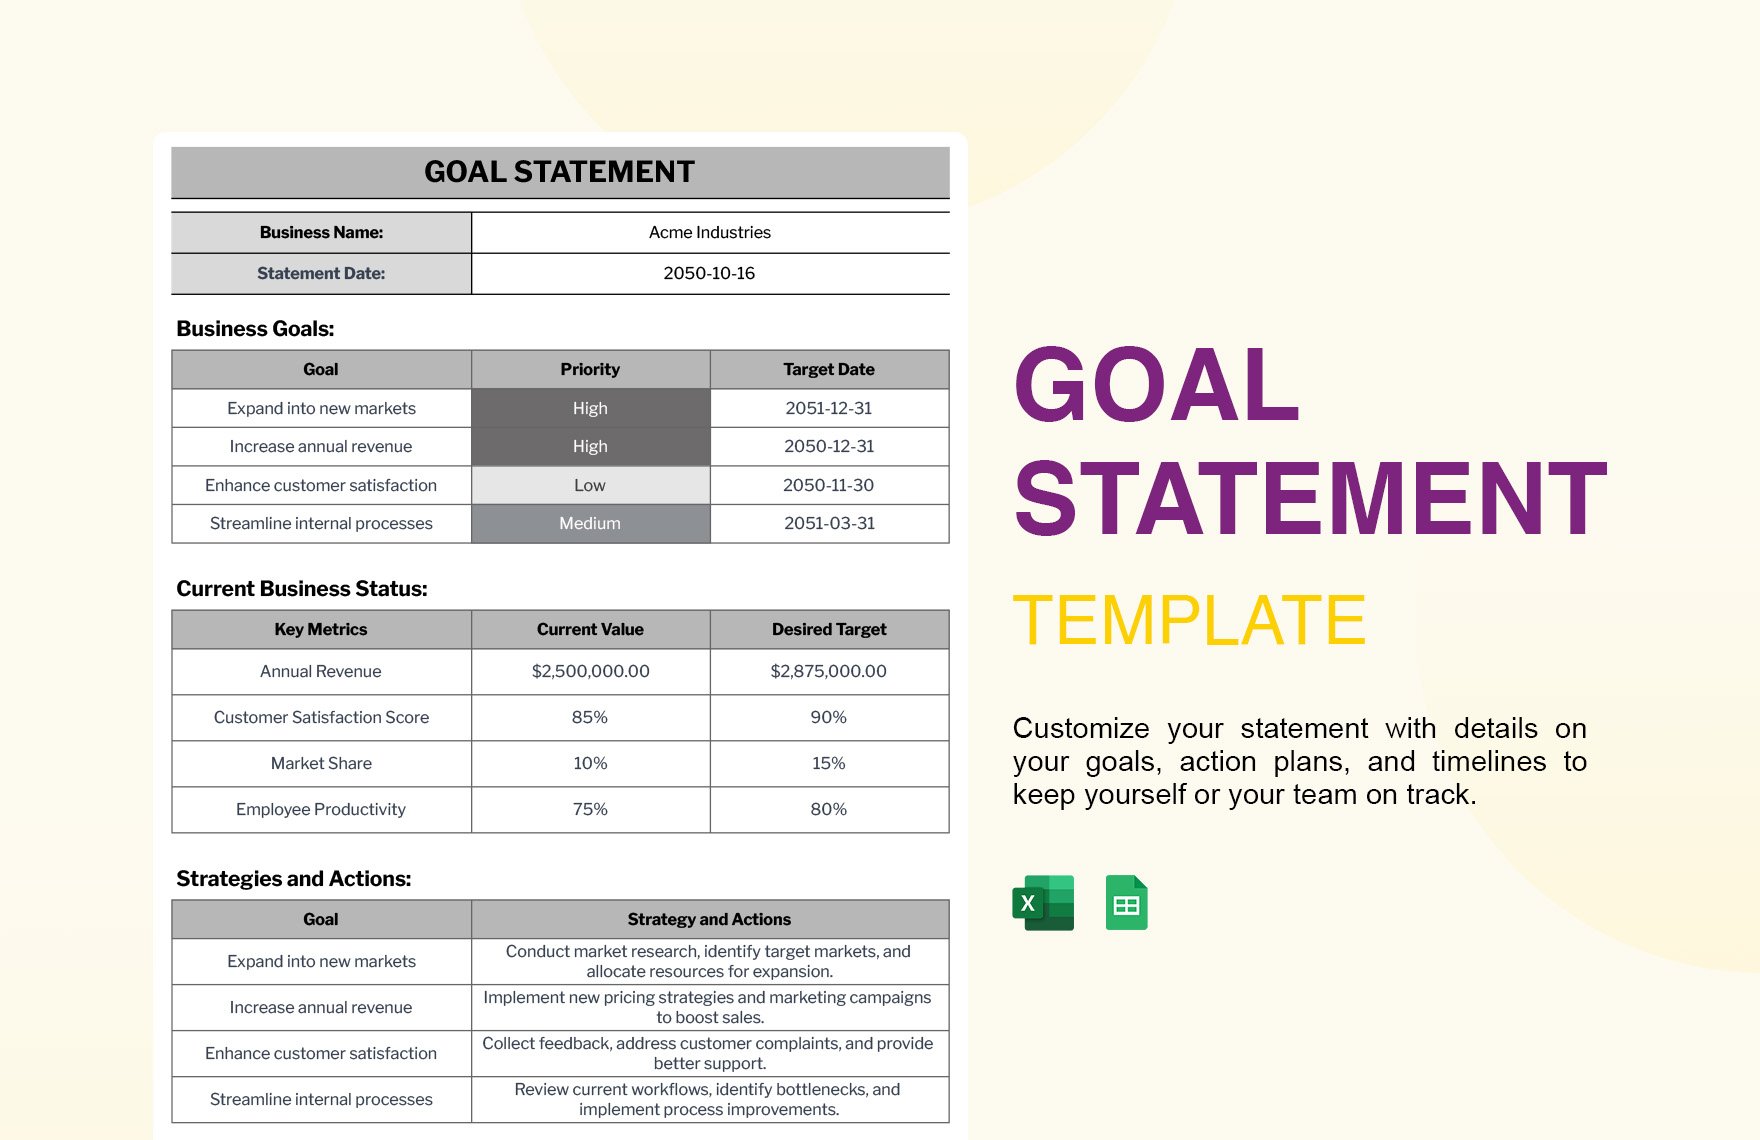 Free Goal Statement Template in Excel, Google Sheets, Adobe XD